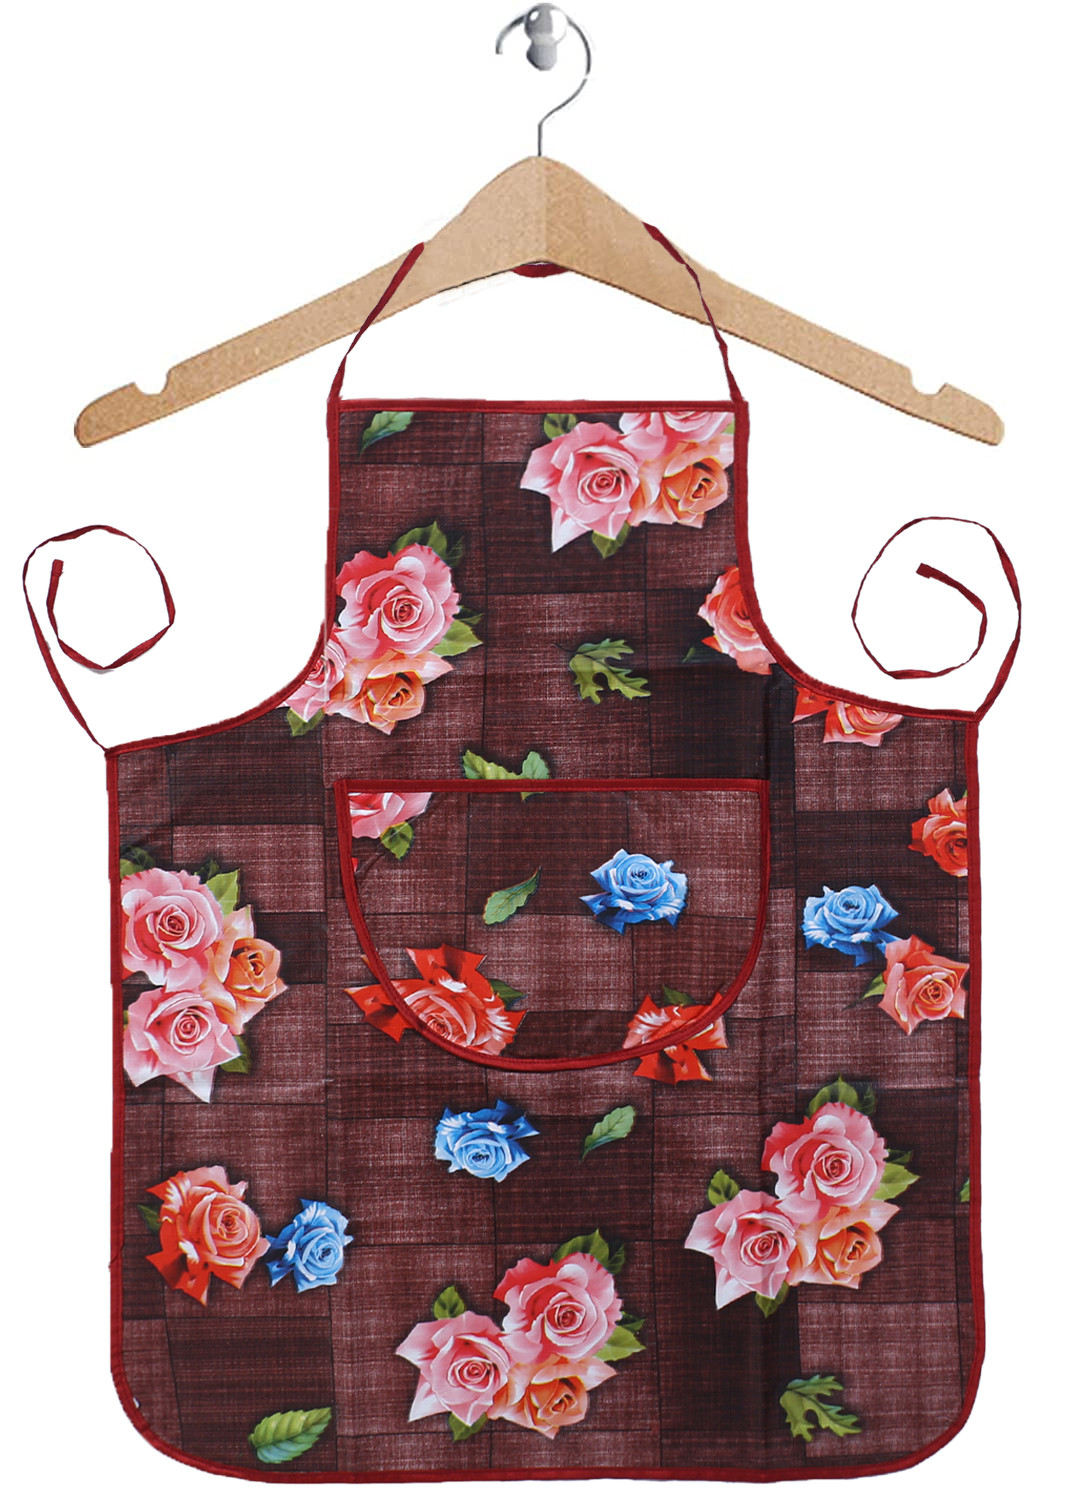 Kuber Industries Apron|PVC Unique Rose Printed Kitchen Chef Cloth|Waterproof Centre Pocket Apron With Tying Cord for Men & Women (Maroon)